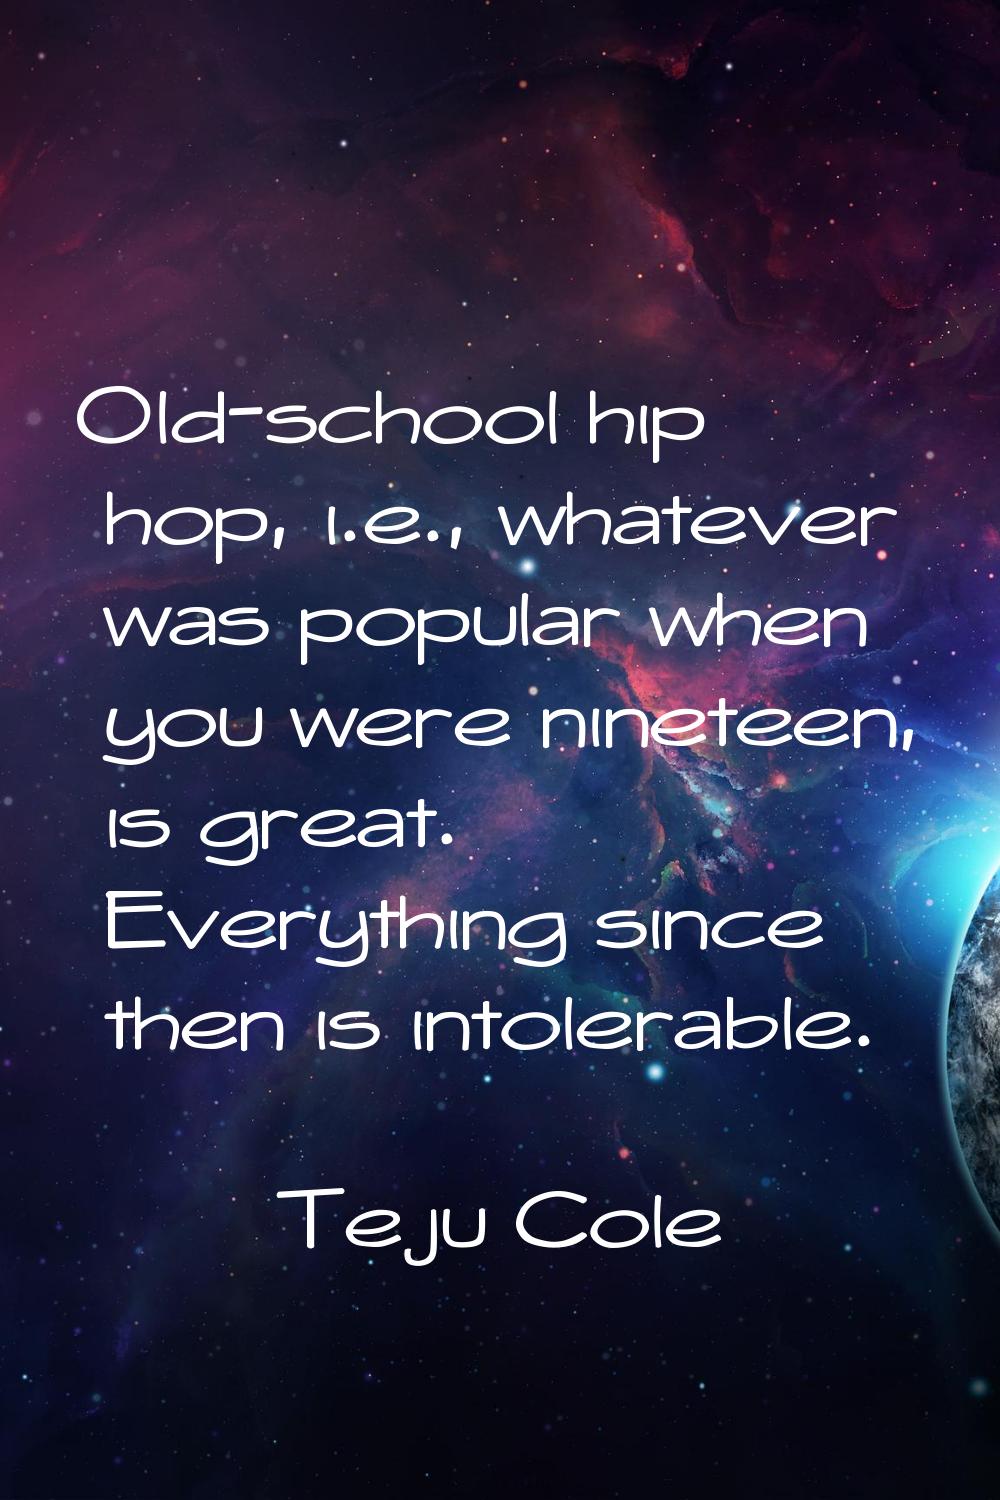 Old-school hip hop, i.e., whatever was popular when you were nineteen, is great. Everything since t